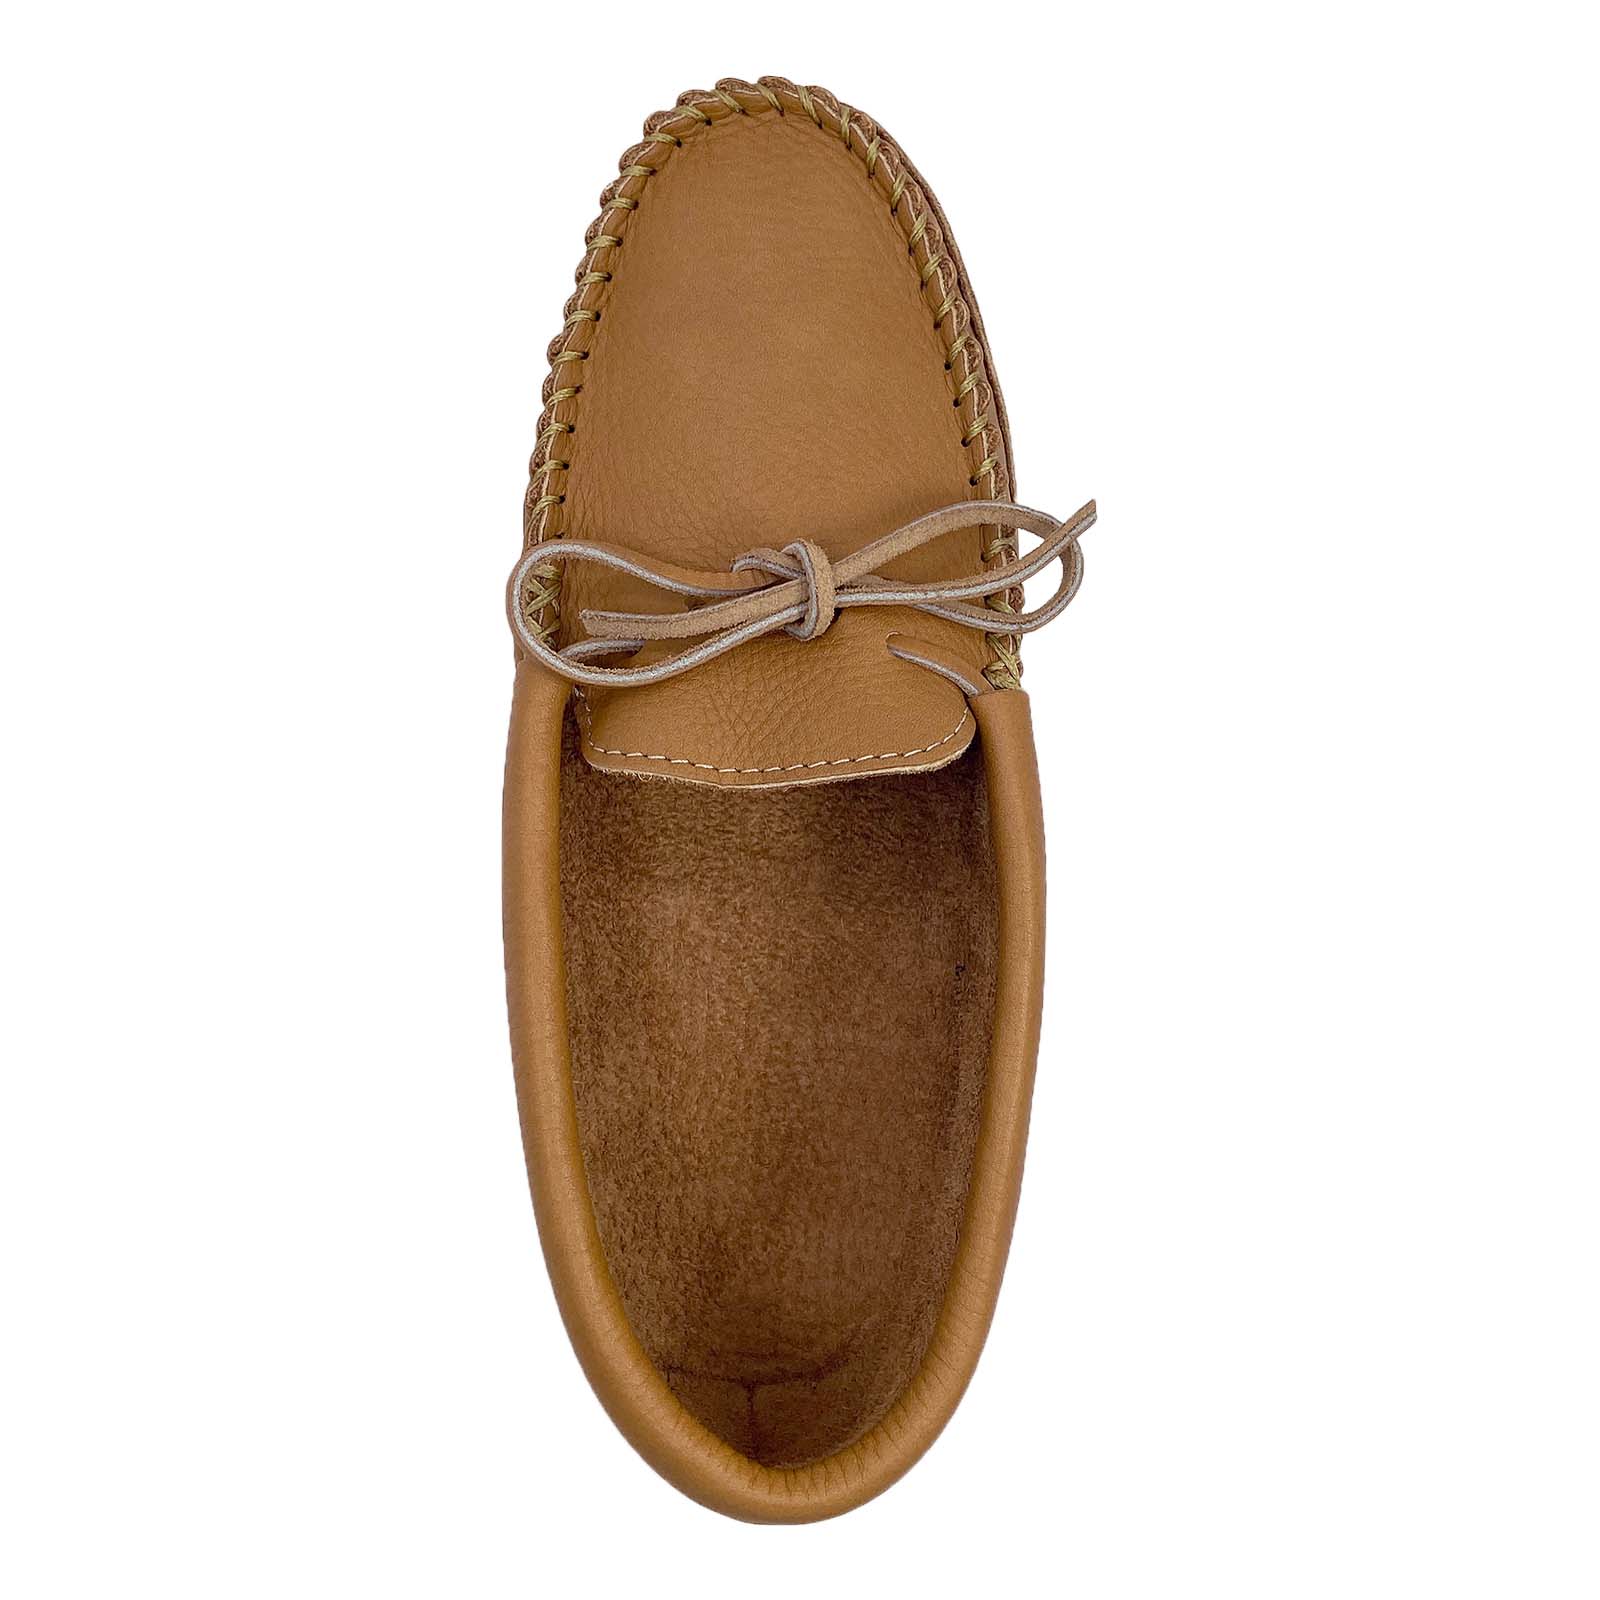 Men's 'Deer Touch' Leather Moccasins